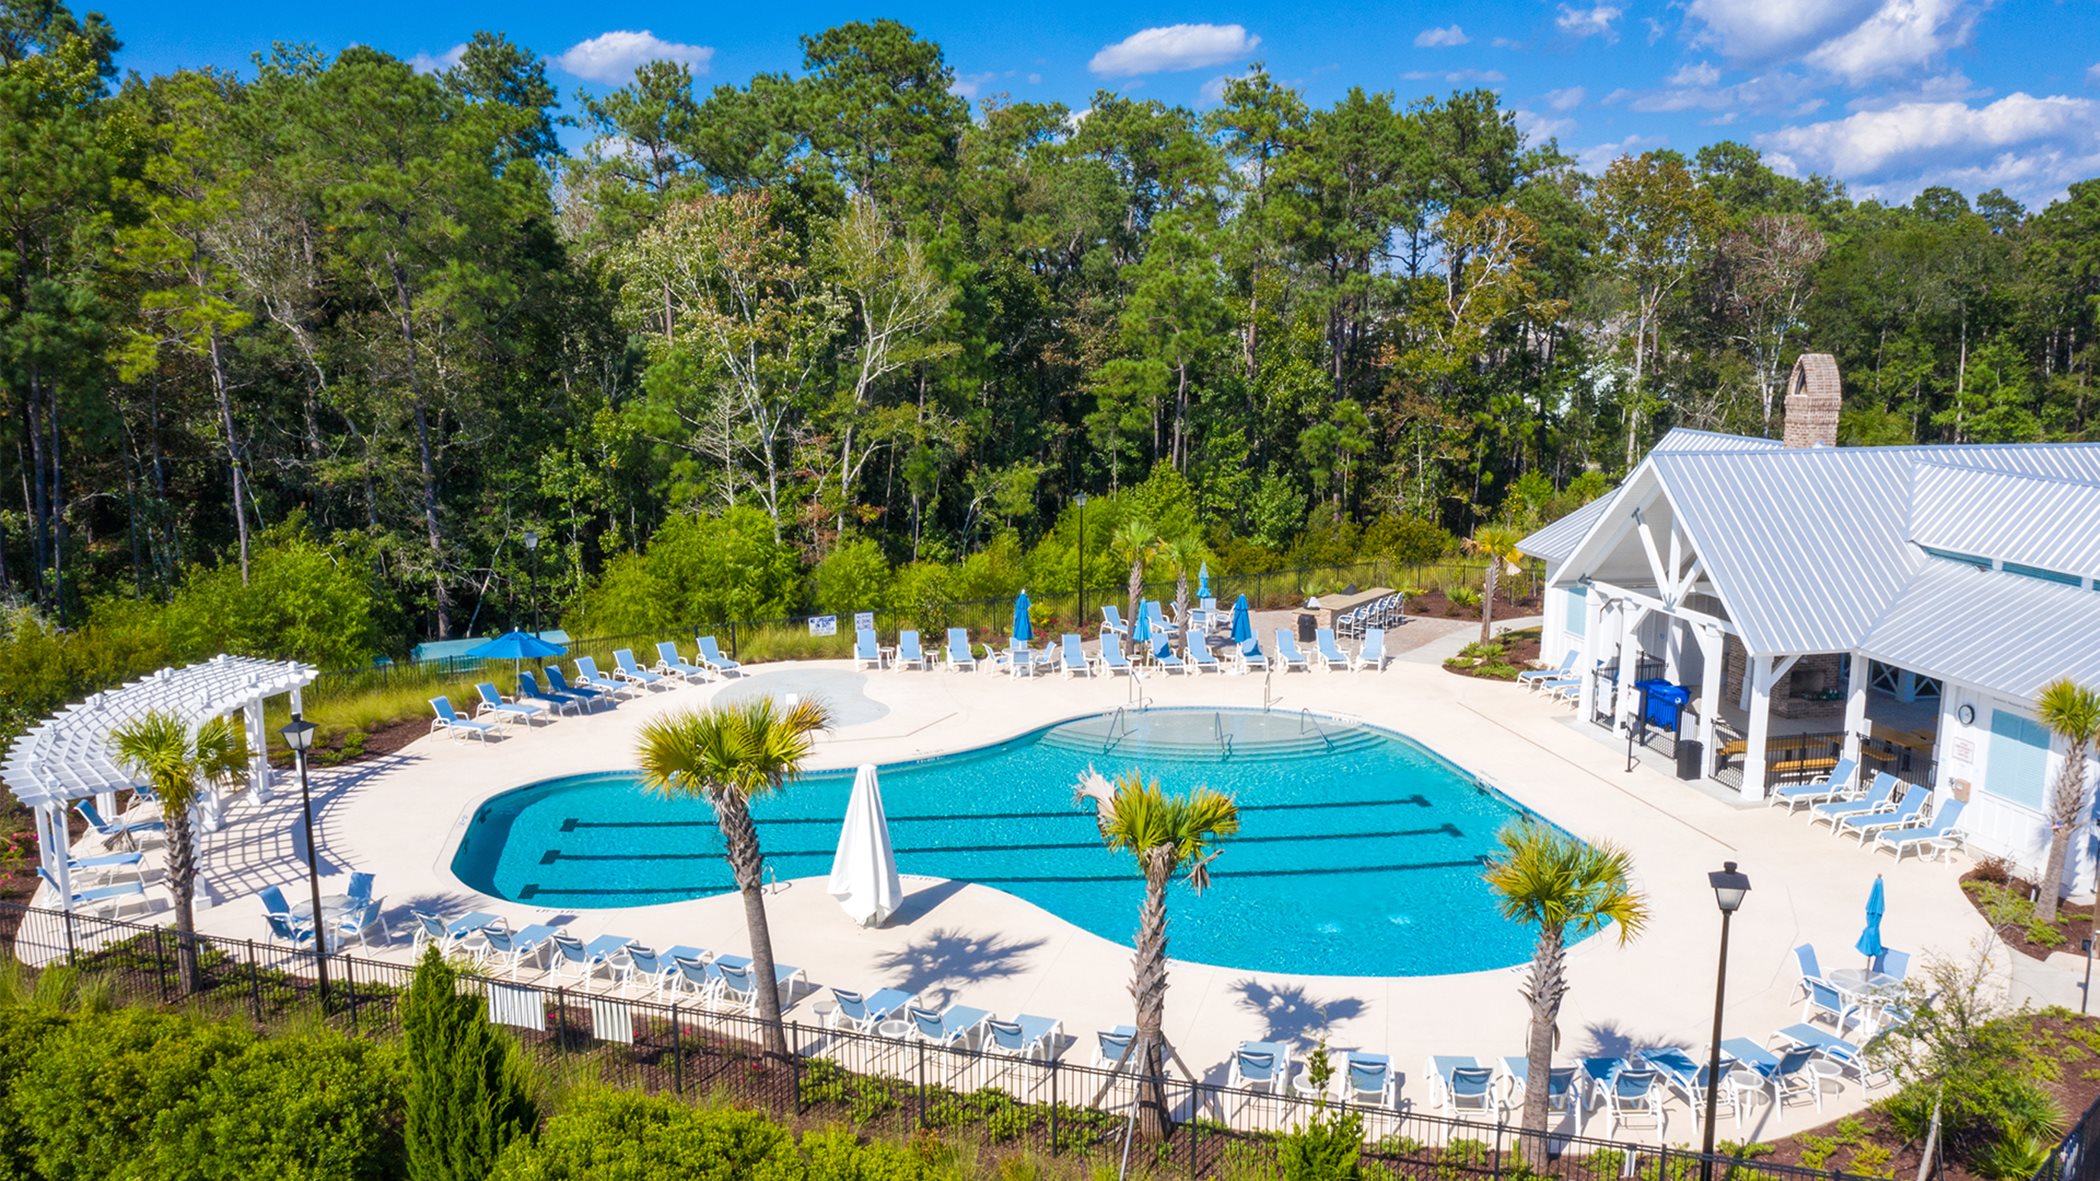 New Homes for Sale in Myrtle Beach